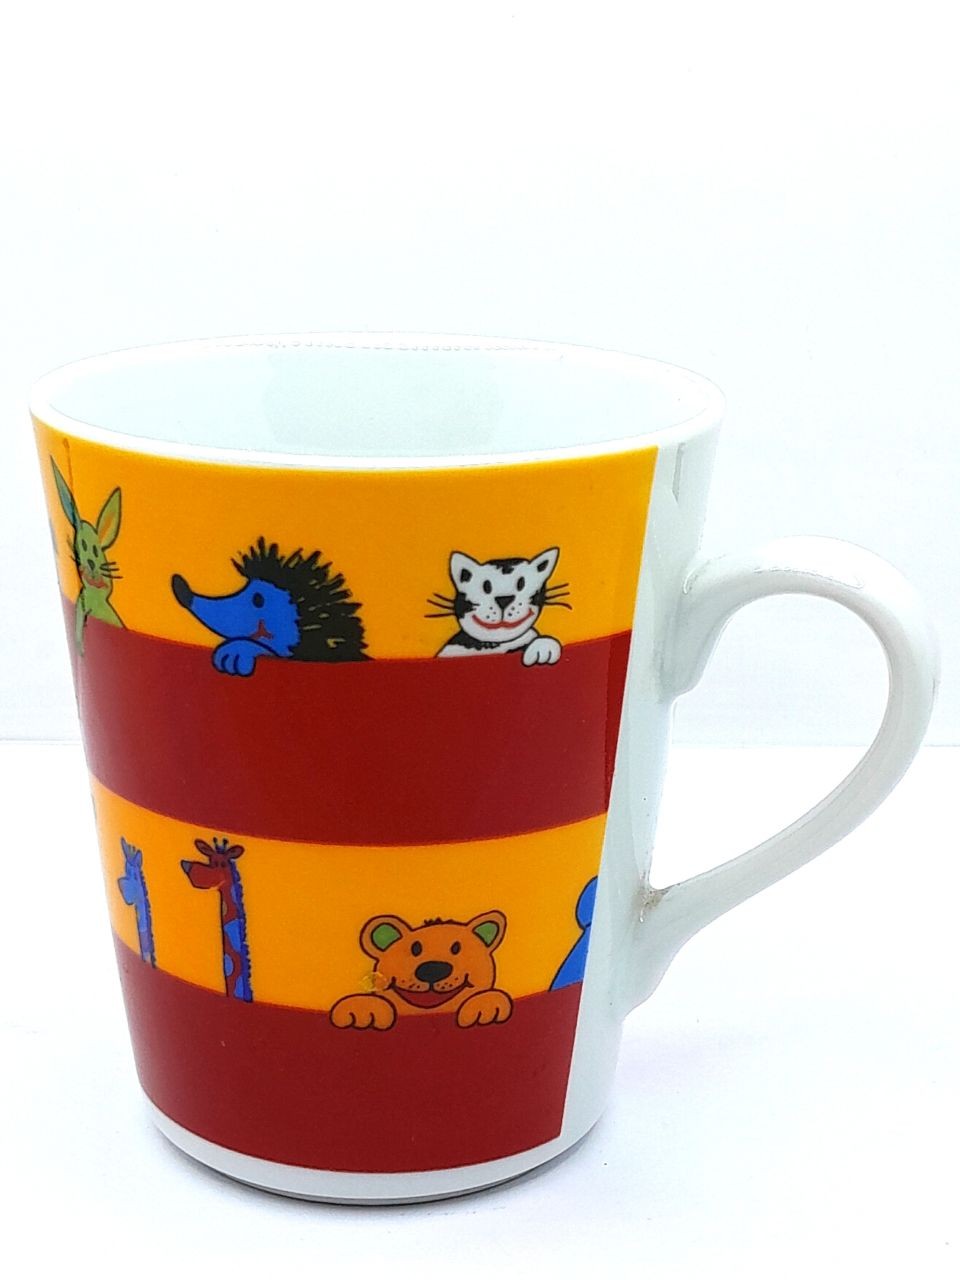 Mug with children's drawings